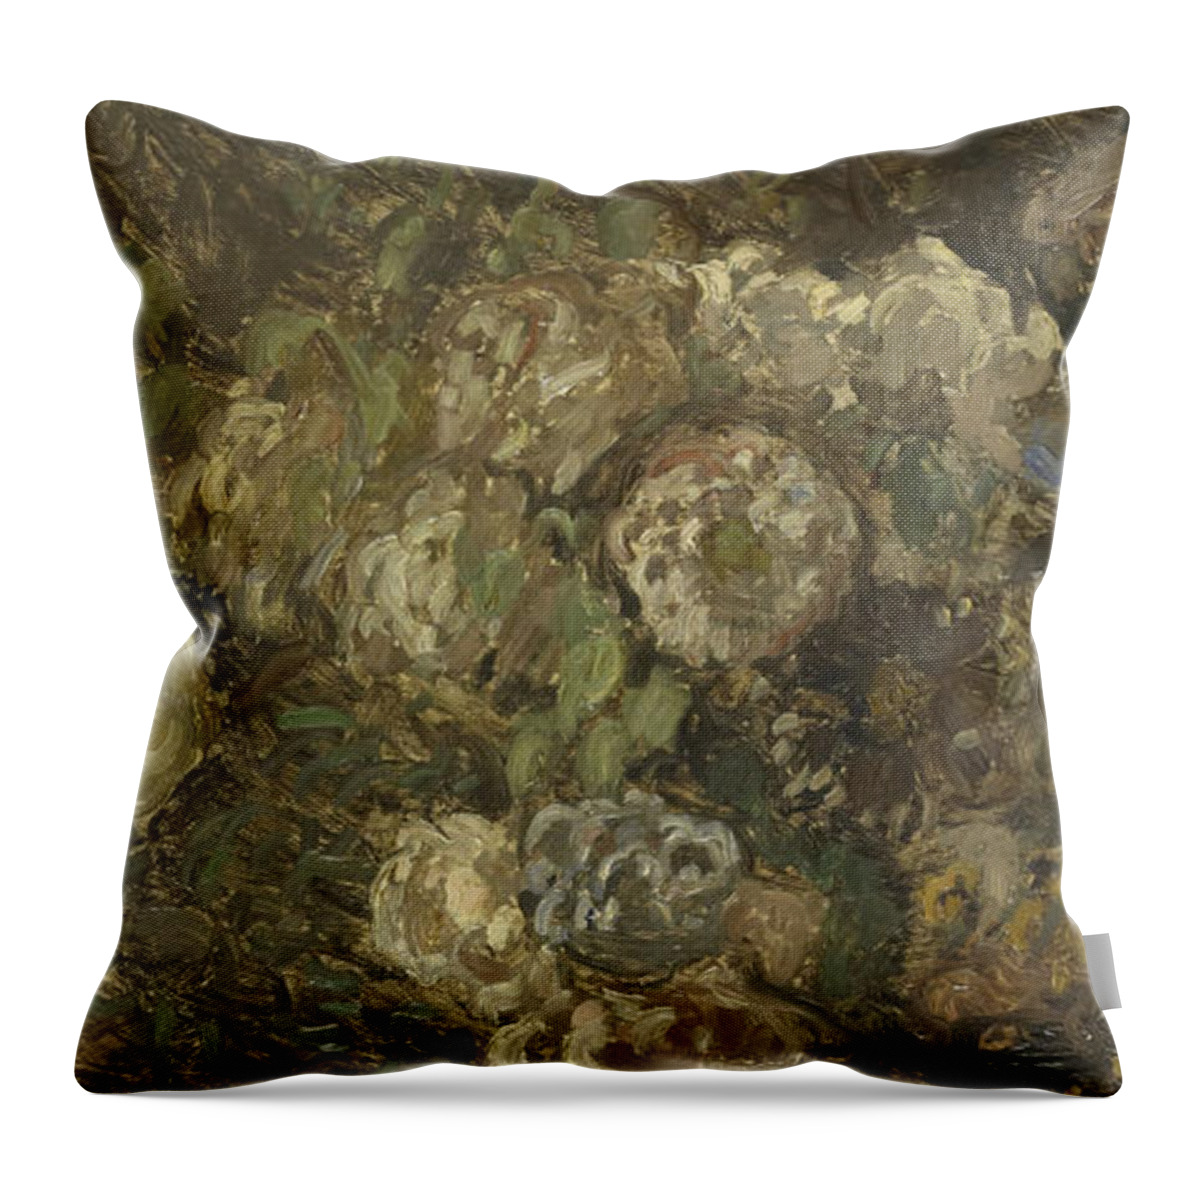 Flowers Throw Pillow featuring the painting Flowers by Claude Monet